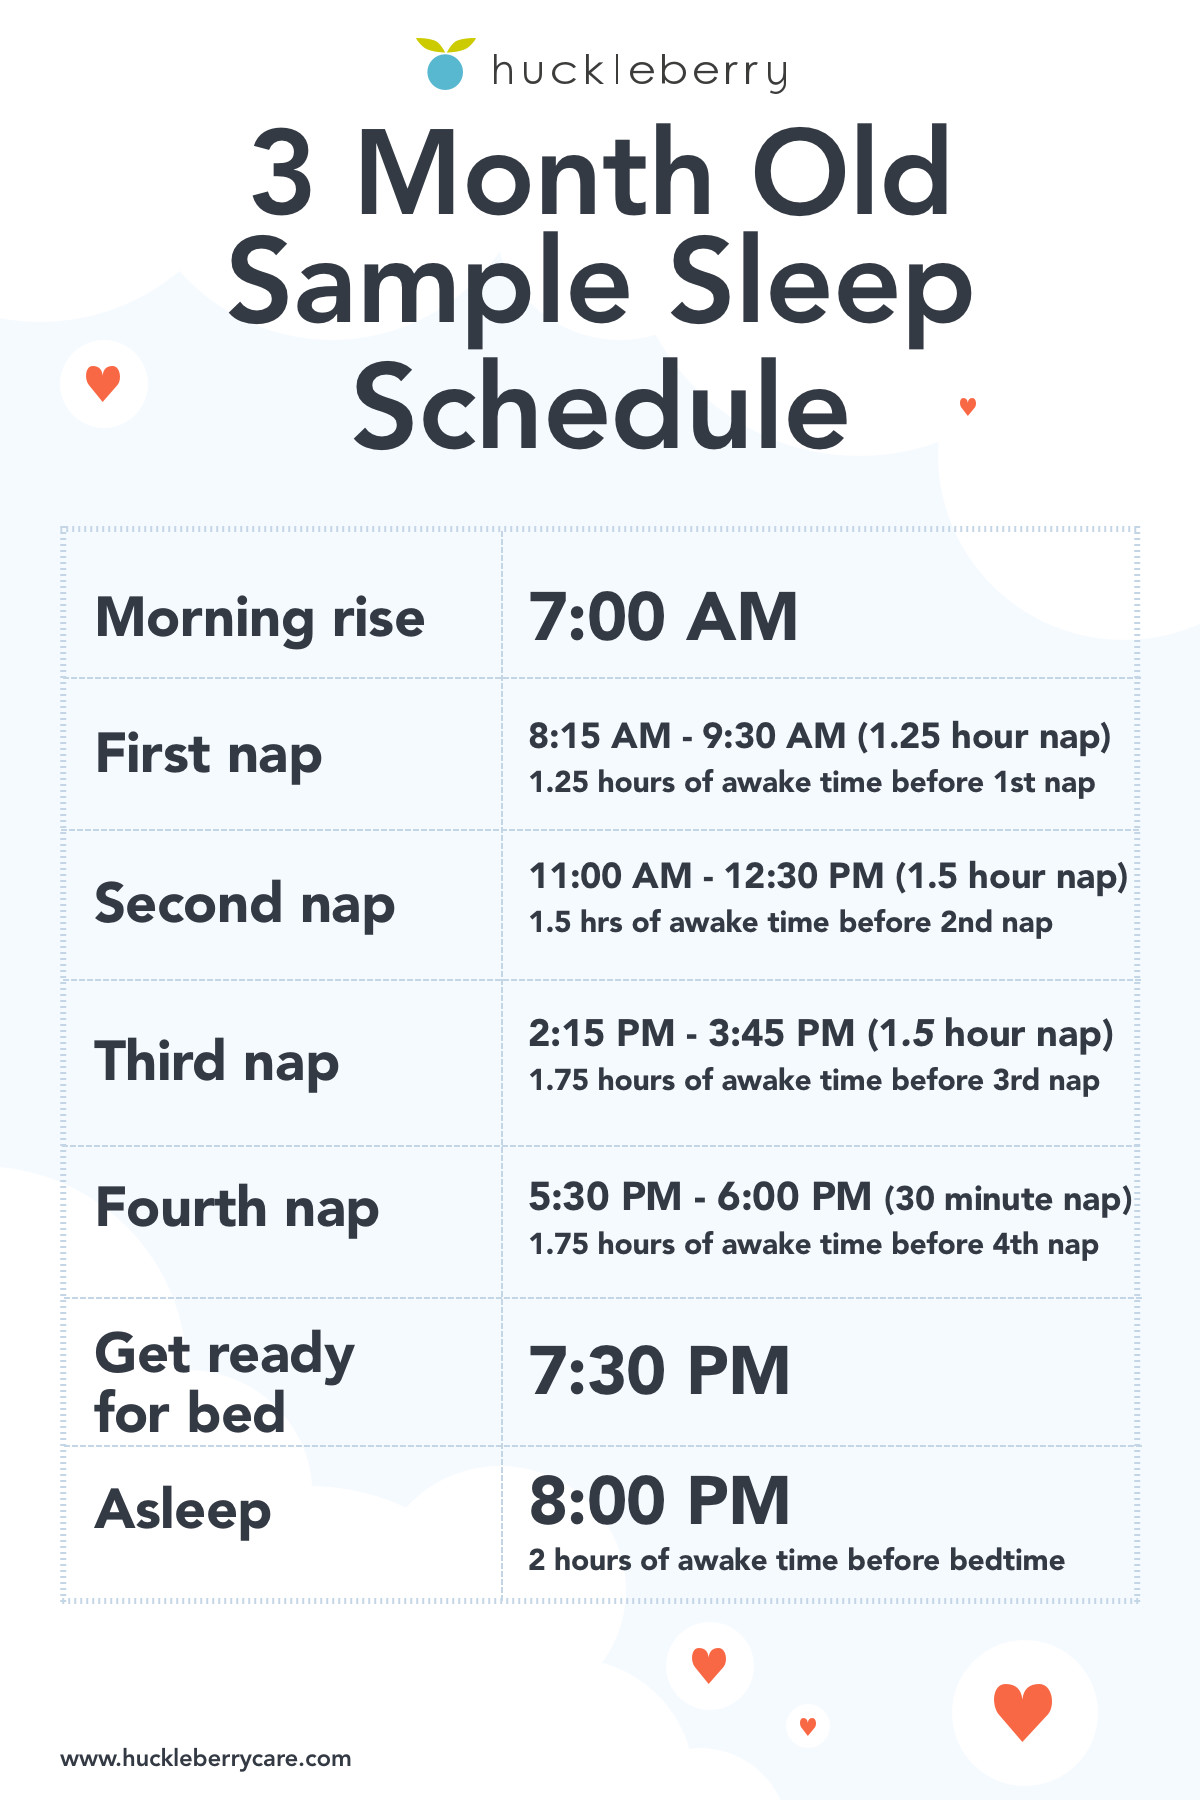 buy-visual-evening-routine-evening-bedtime-schedule-timetable-cards-compatible-with-pecs